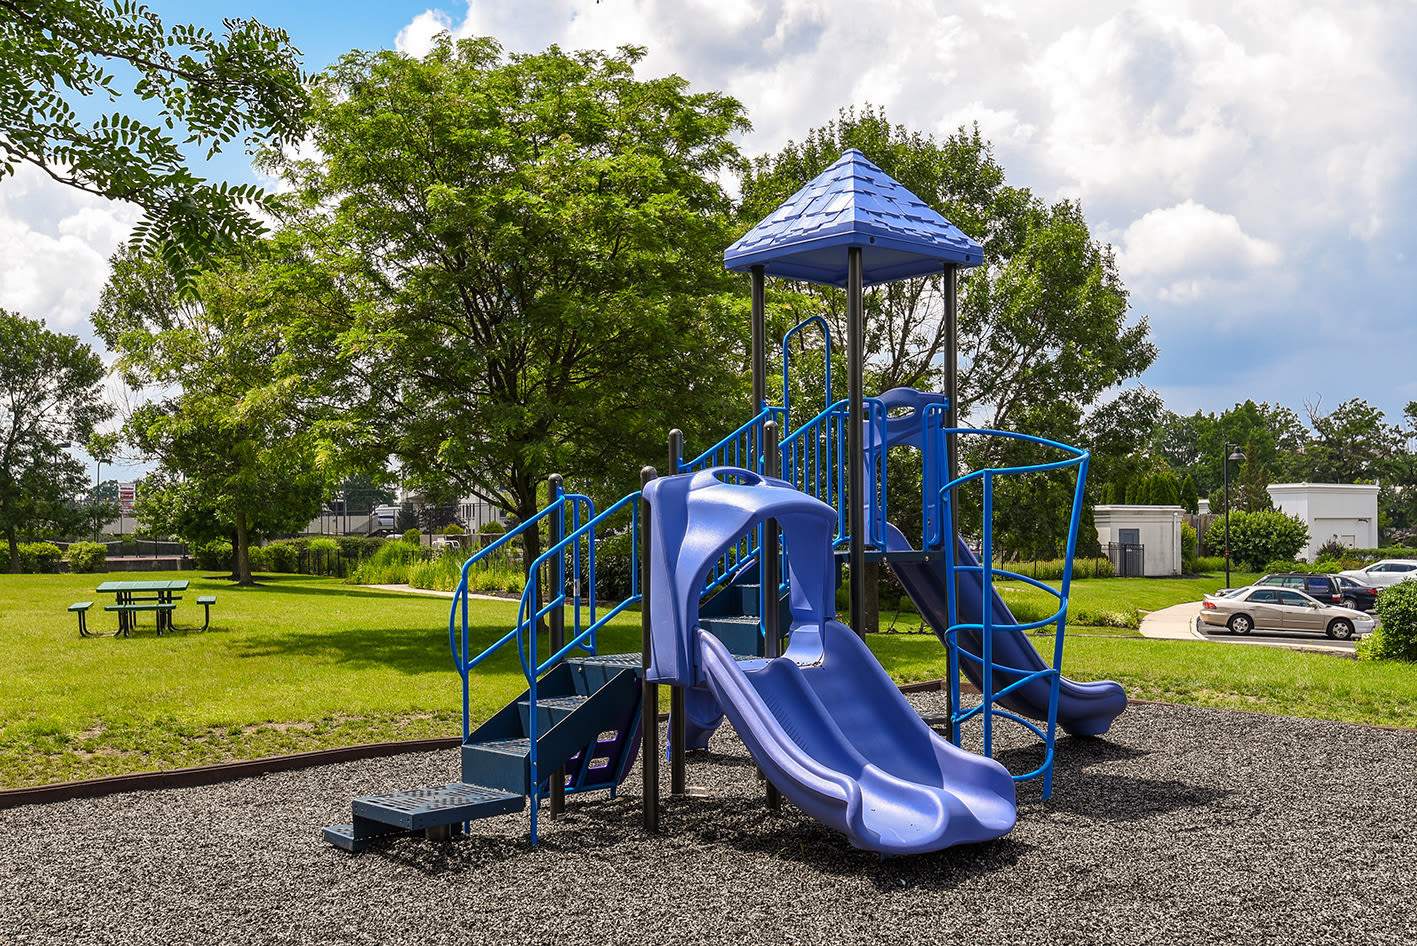 Playground at Cherry Hill Towers in Cherry Hill, New Jersey